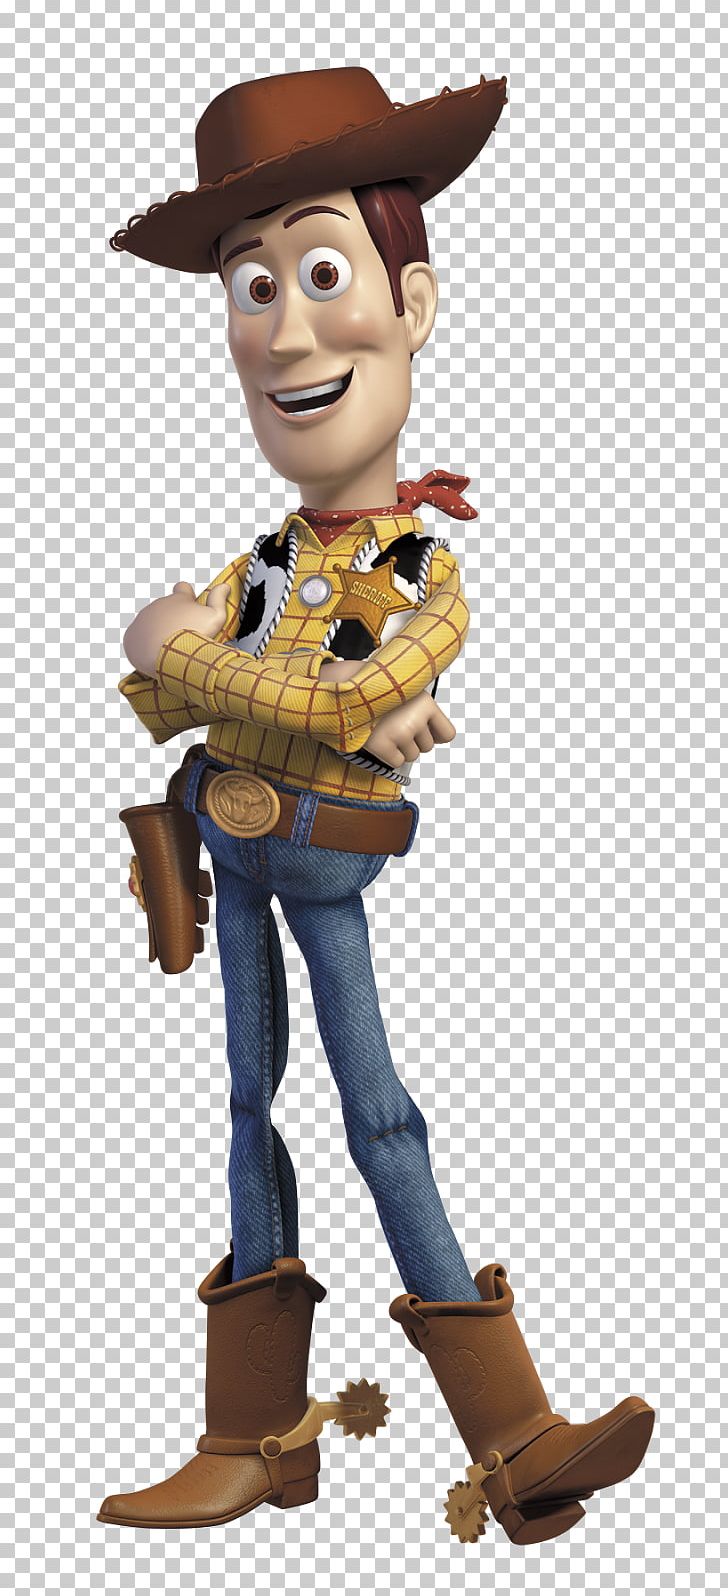 Sheriff Woody Buzz Lightyear Jessie Toy Story 3 PNG, Clipart, Buzz Lightyear, Cartoon, Cowboy, Cowboy Hat, Decal Free PNG Download